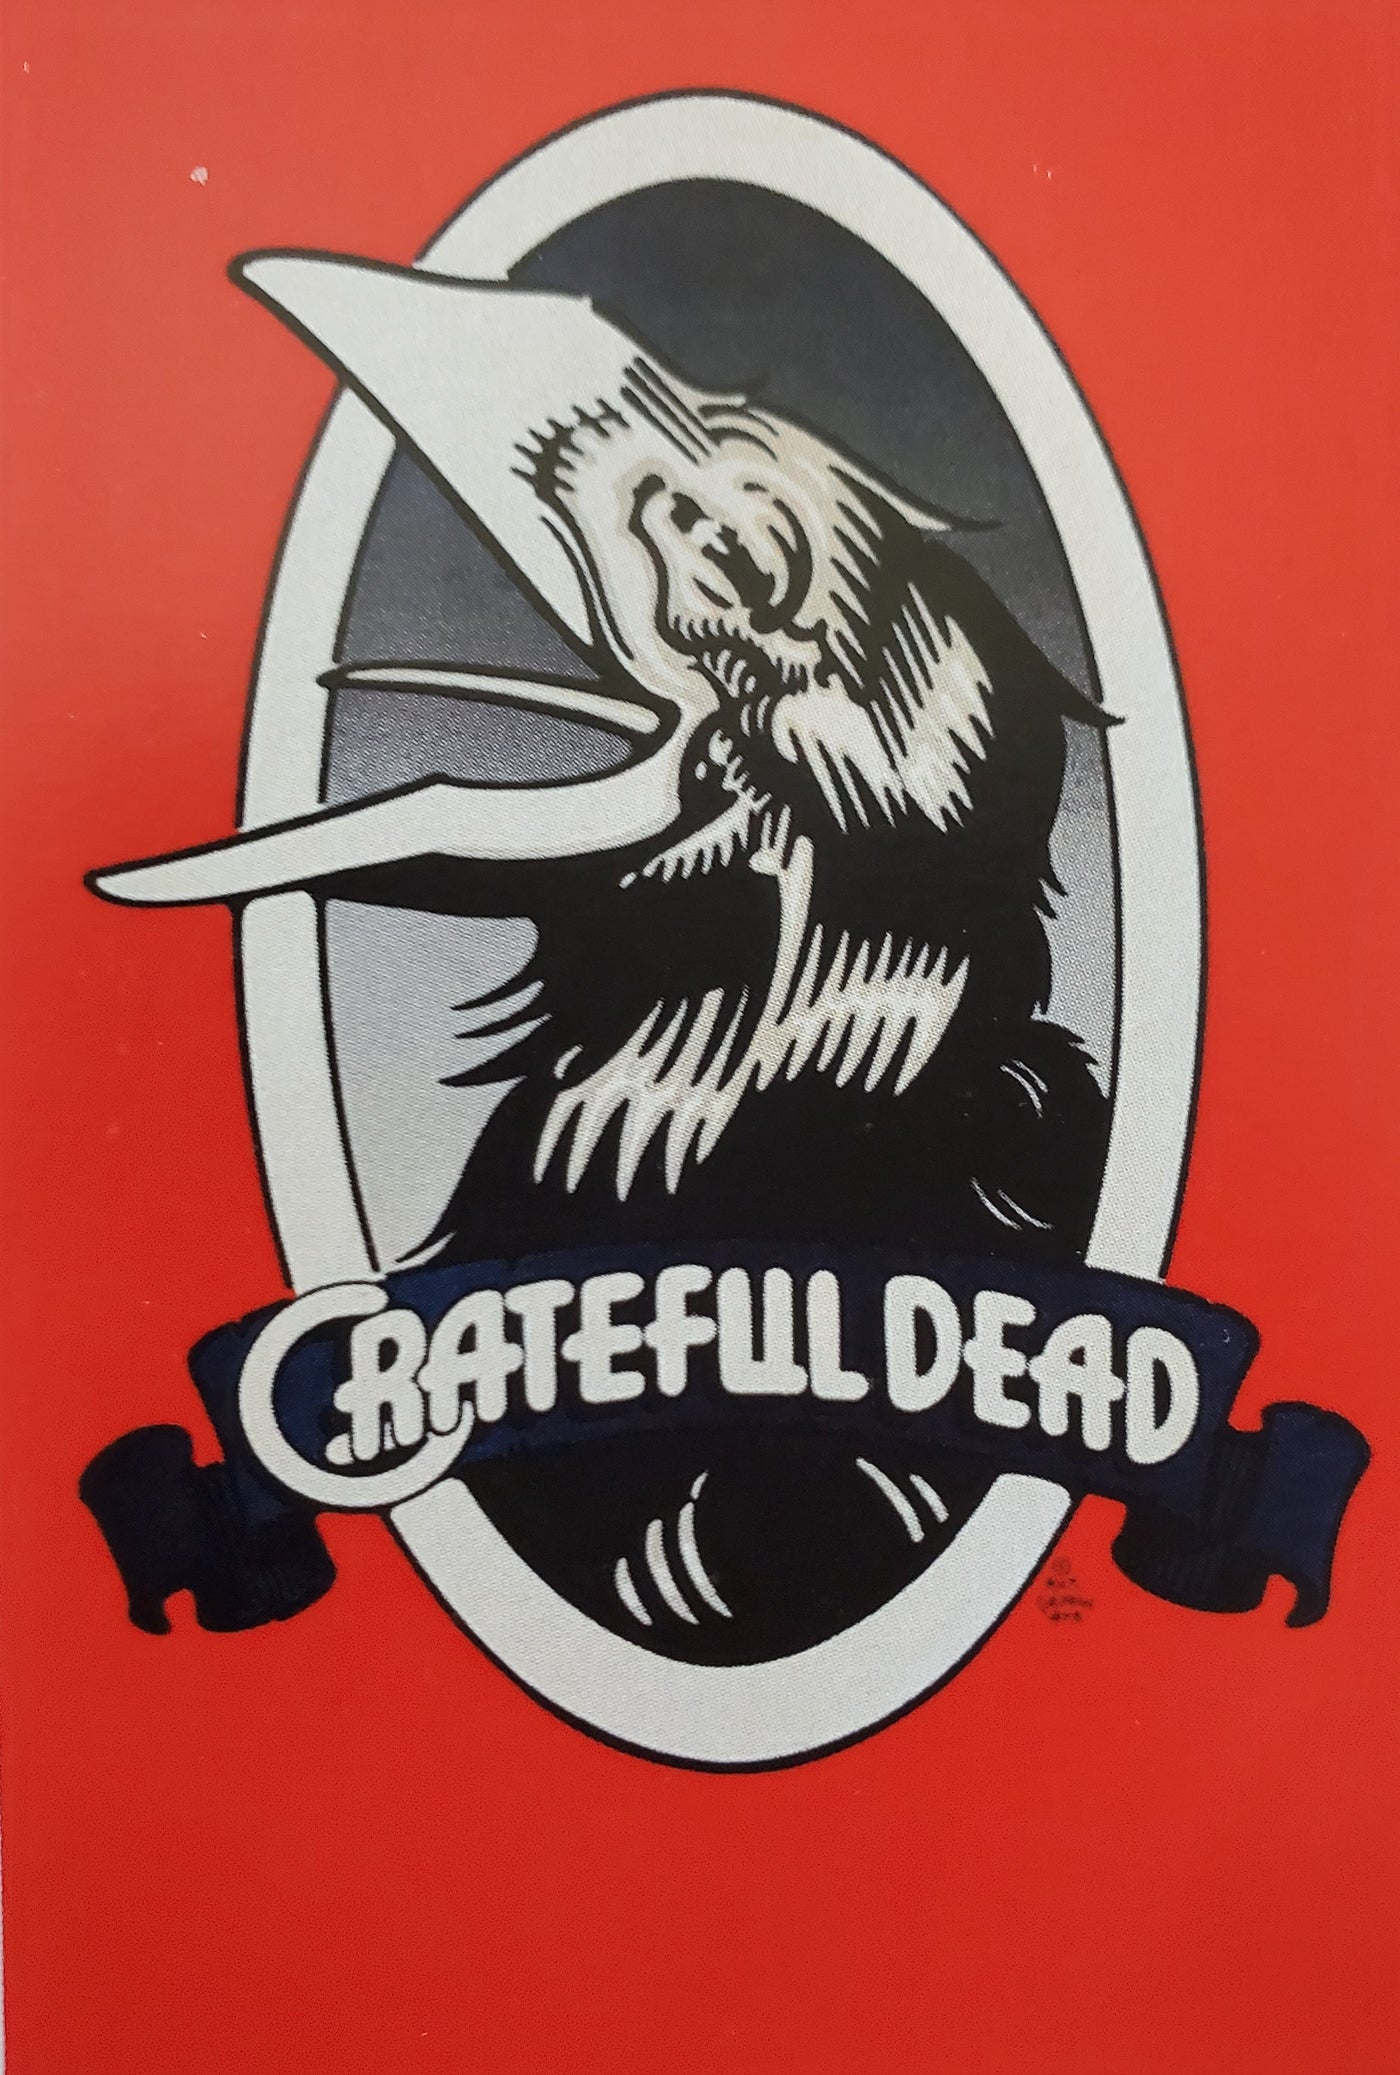 Afterthought Poster 451 Grateful Dead